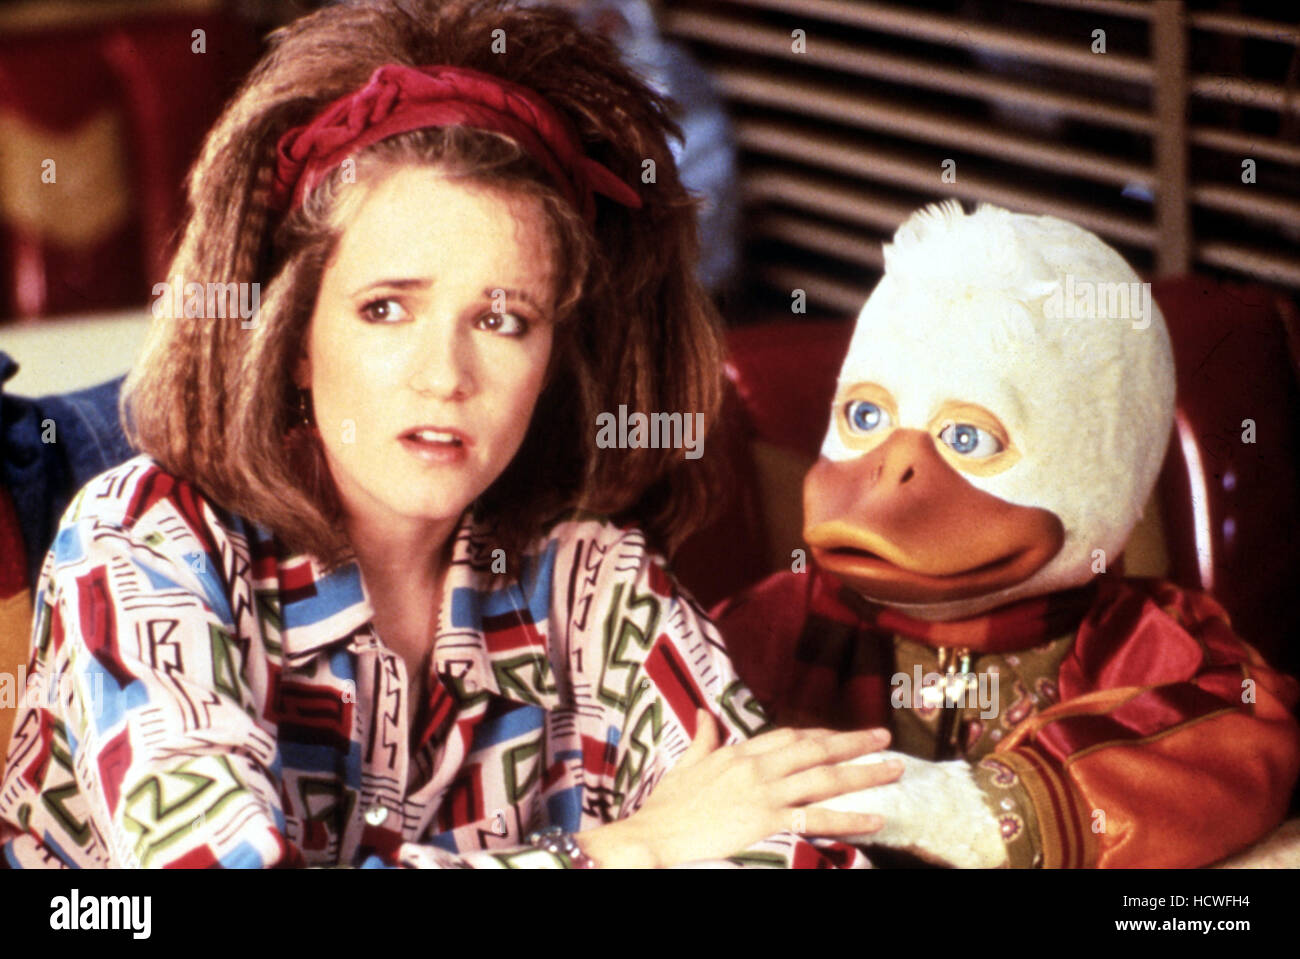 HOWARD THE DUCK, Lea Thompson, 1986. (c) Universal Pictures/ Courtesy: Everett Collection. Stock Photo